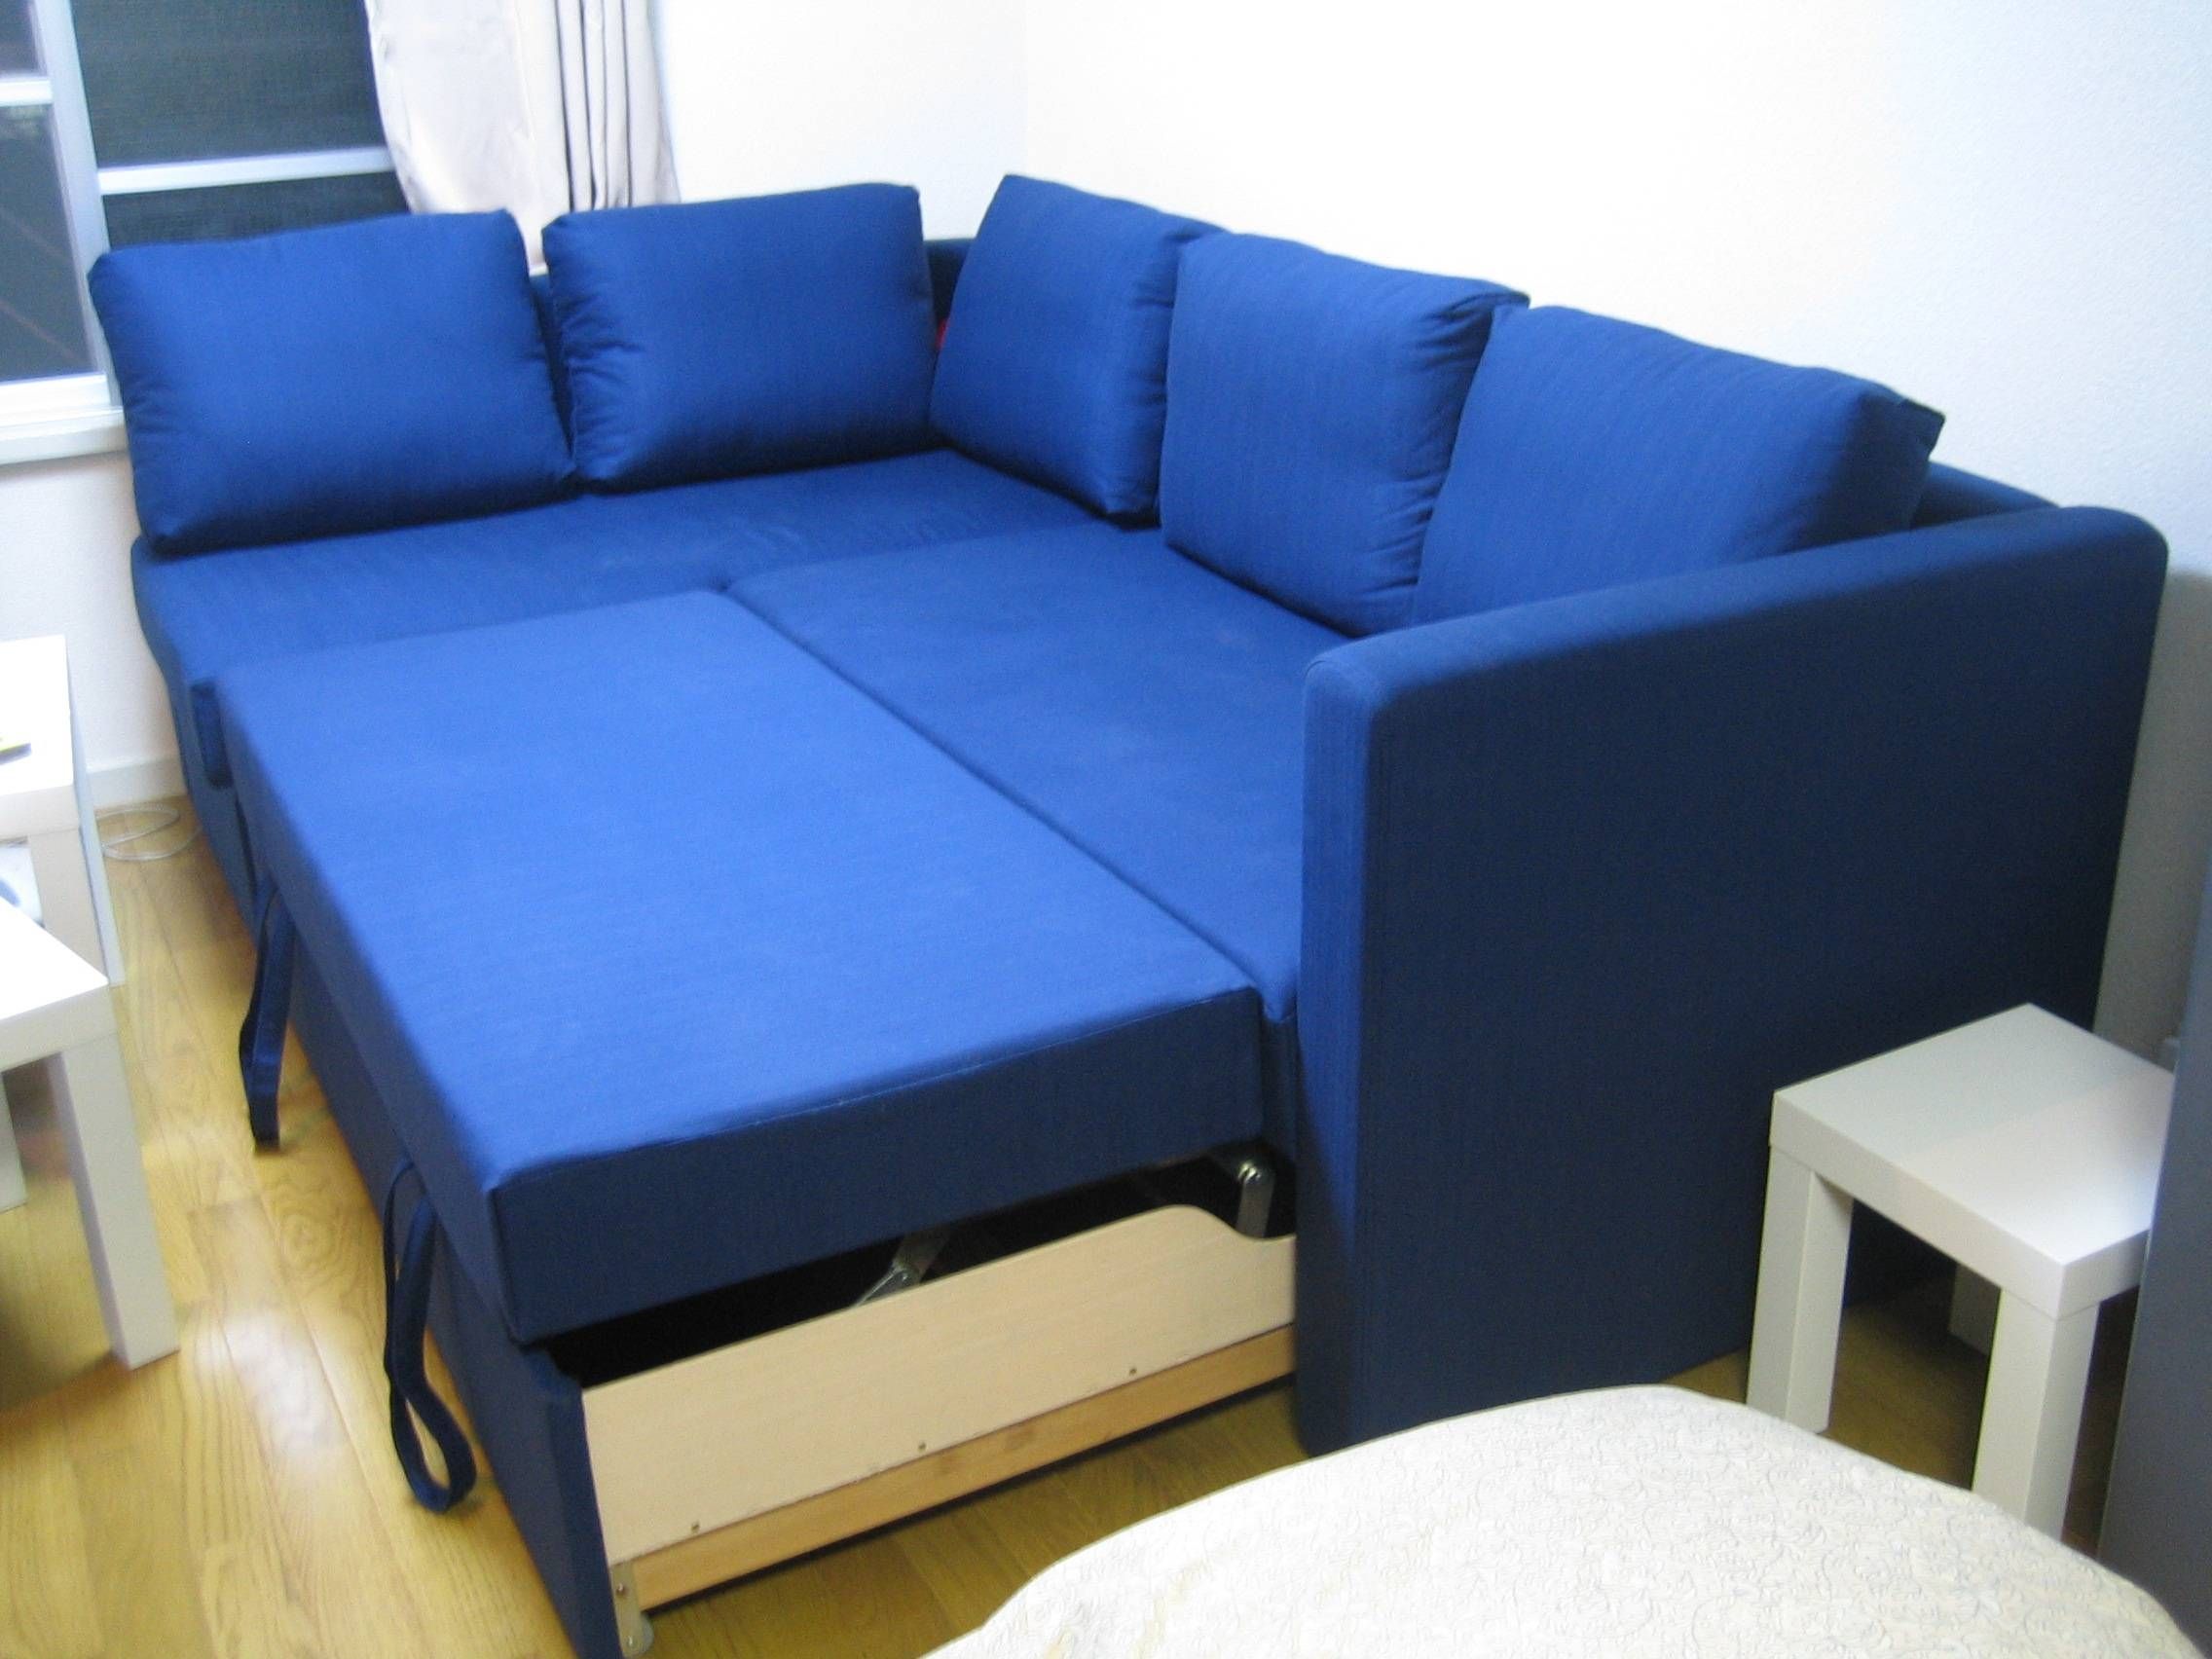 Furniture: Ikea Sofa Beds | Sofa With Pull Out Bed Ikea | Ikea Intended For Ikea Sectional Sofa Bed (View 7 of 25)